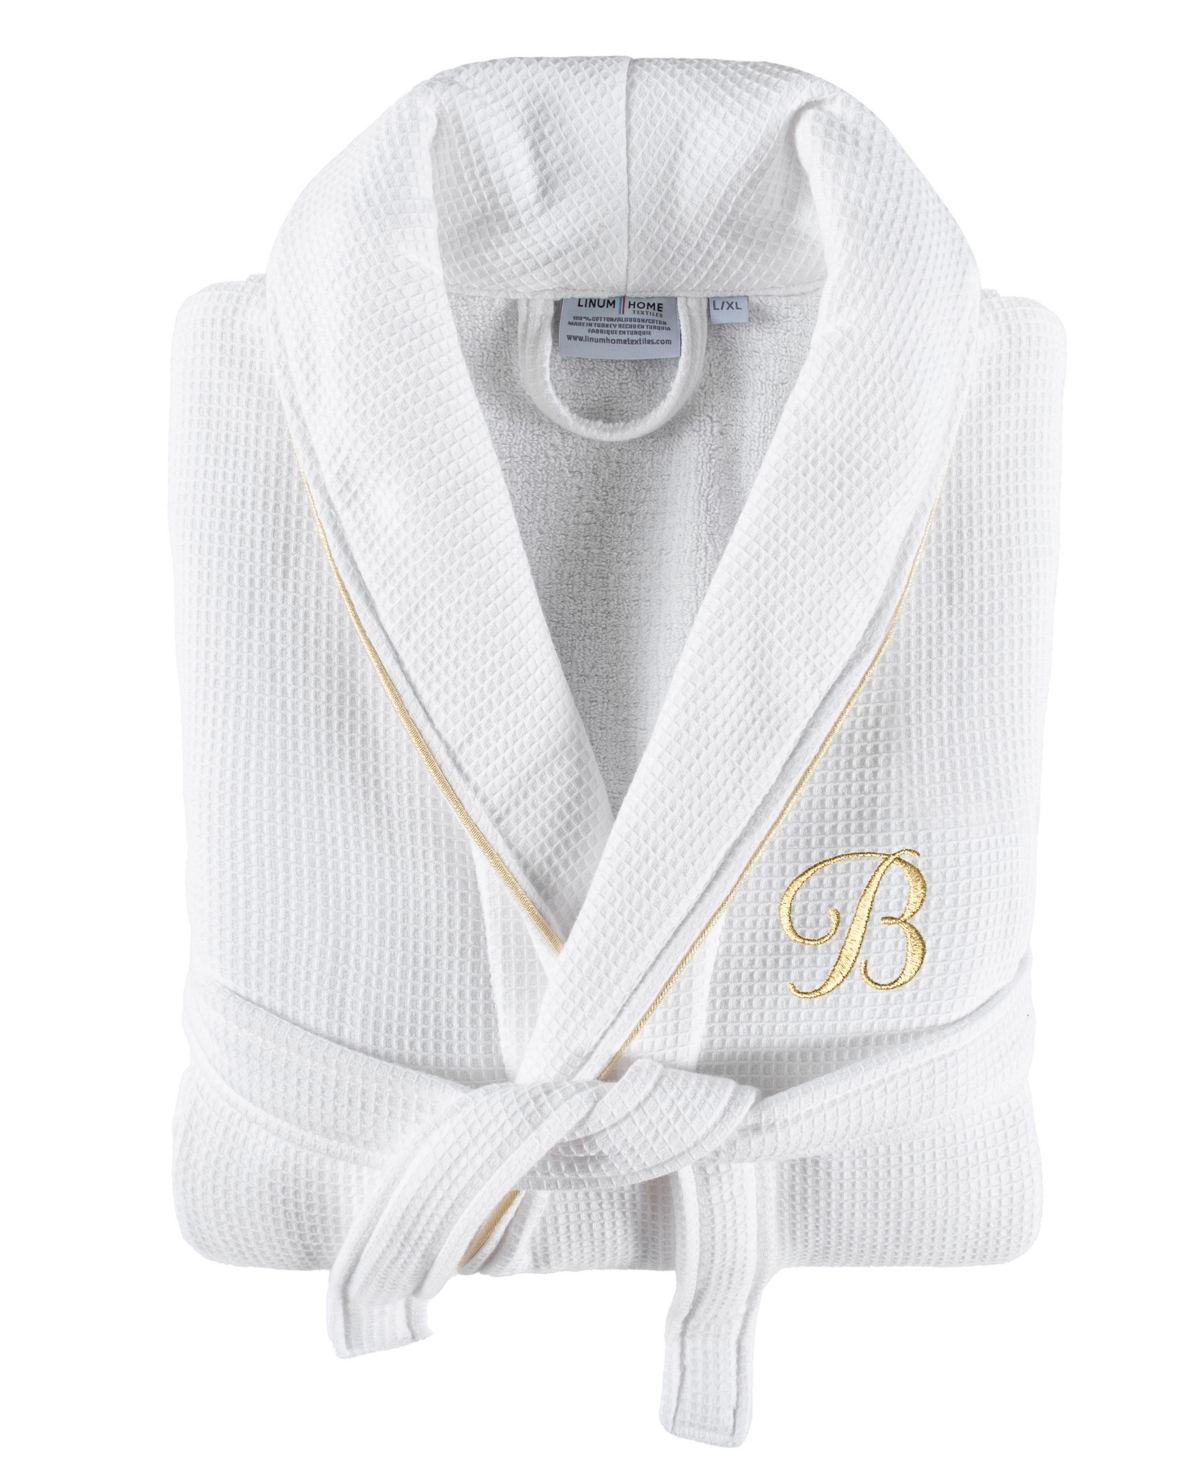 Linum Home Textiles 100% Turkish Cotton Unisex Personalized Waffle Weave Terry Bathrobe With Satin Piped Trim In White B